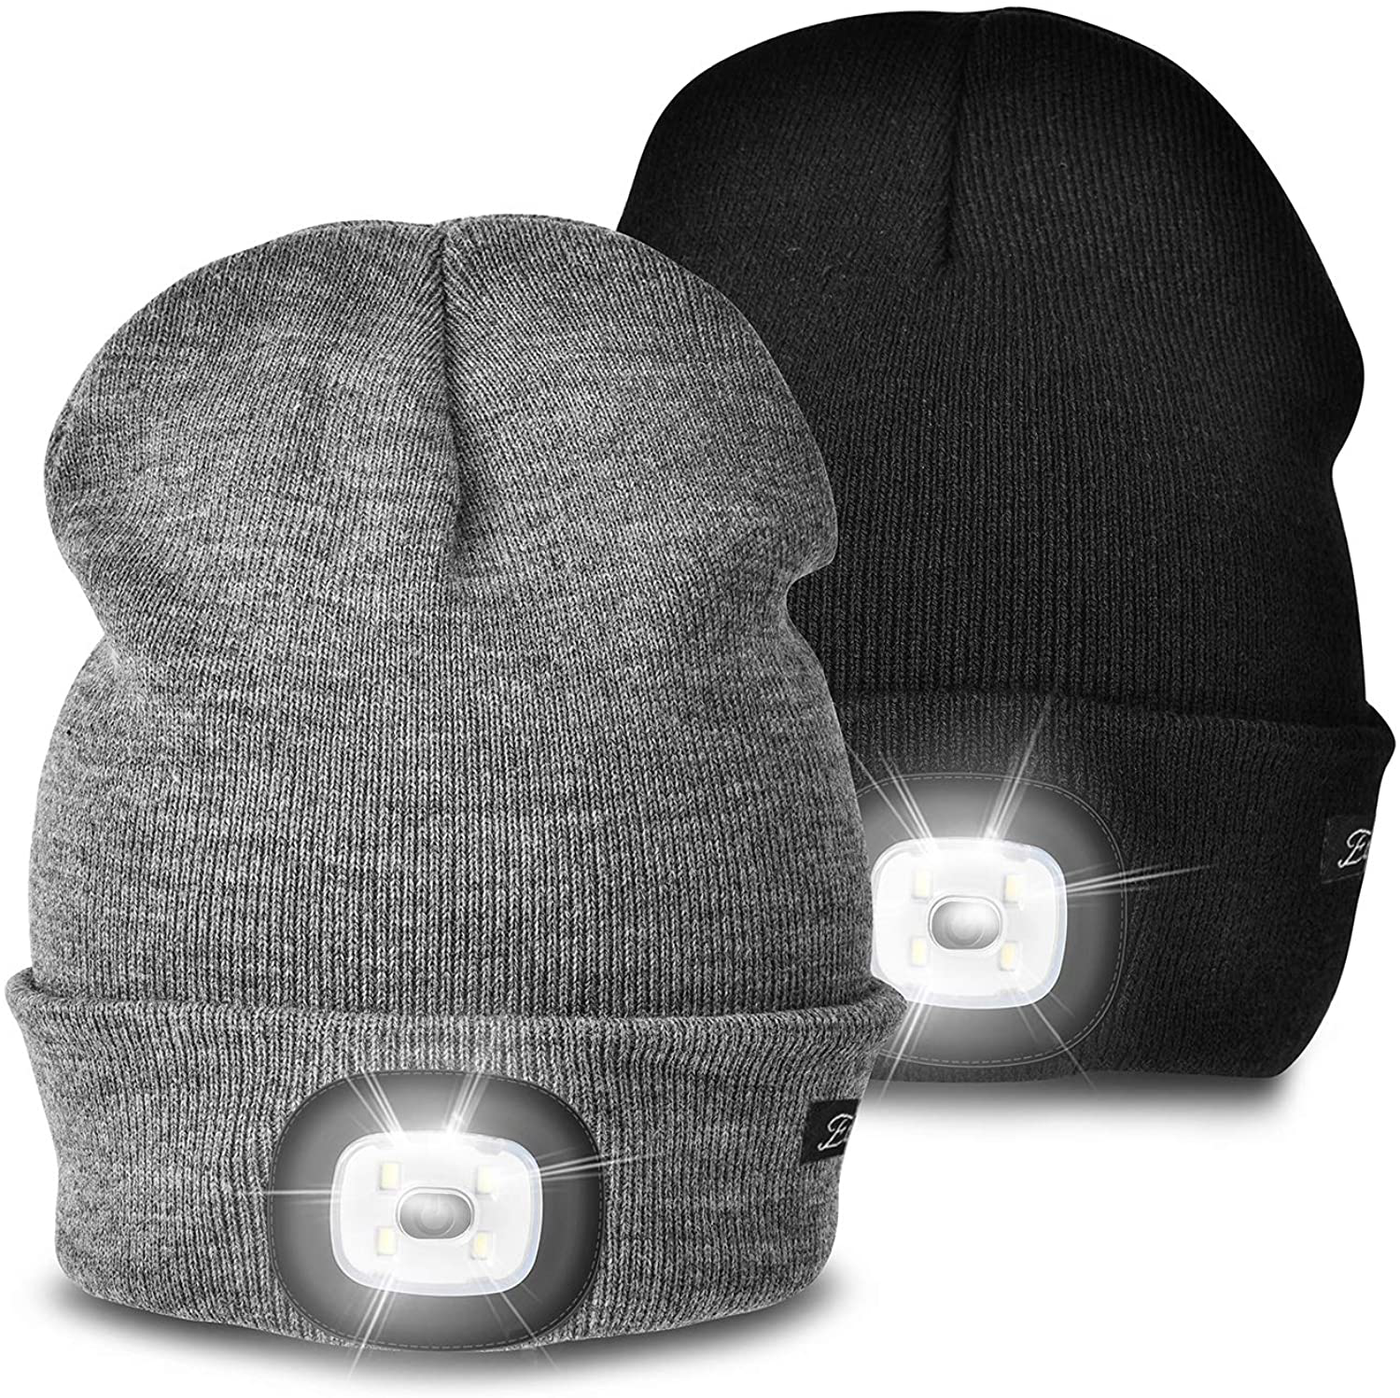 Unisex LED Beanie Hat with Light Gifts for Men Dad Father USB Rechargeable Caps